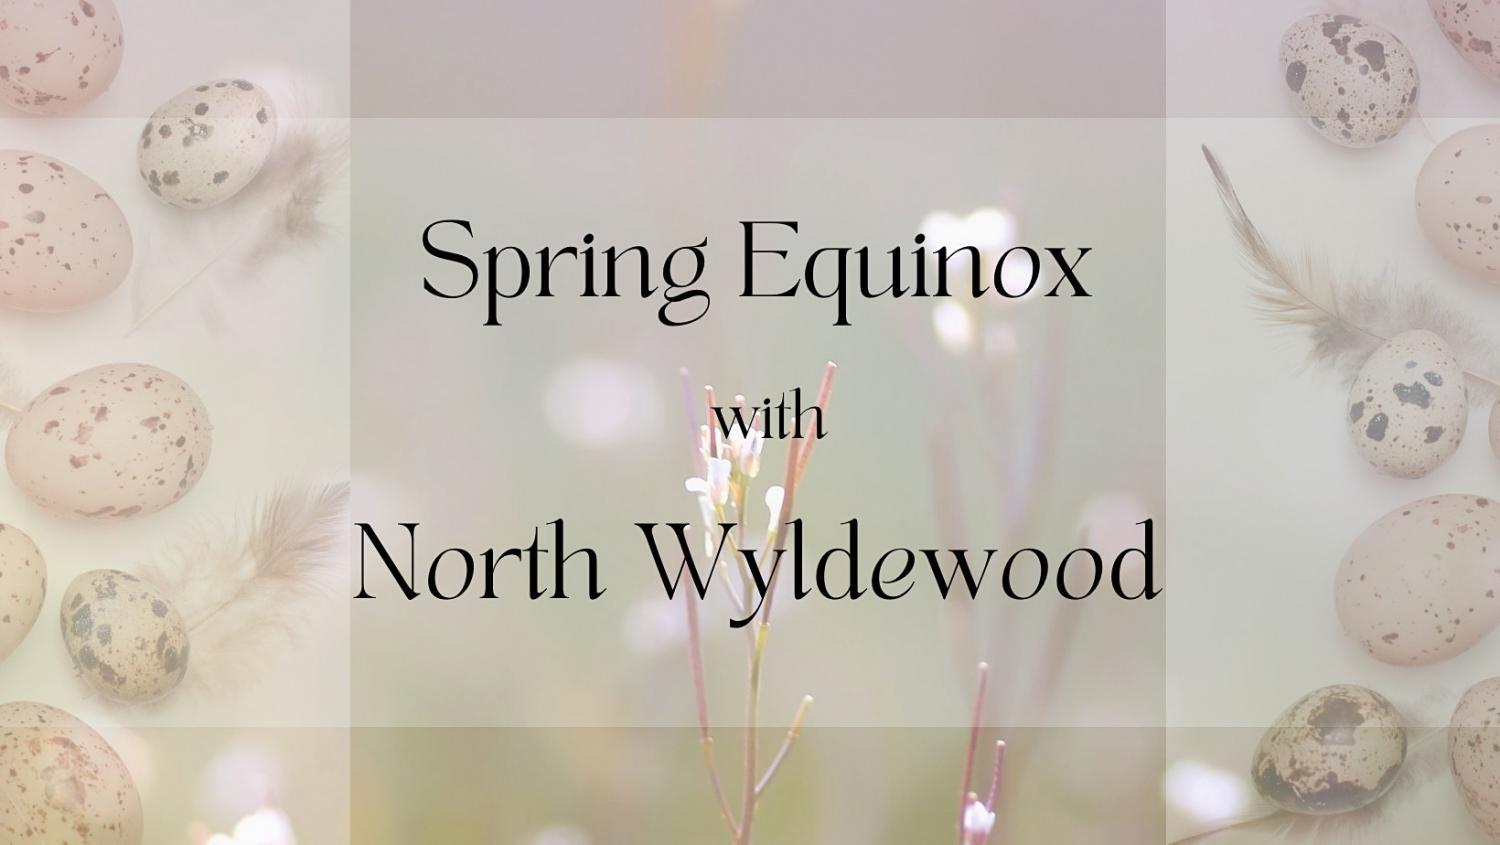 Spring Equinox with North Wyldewood